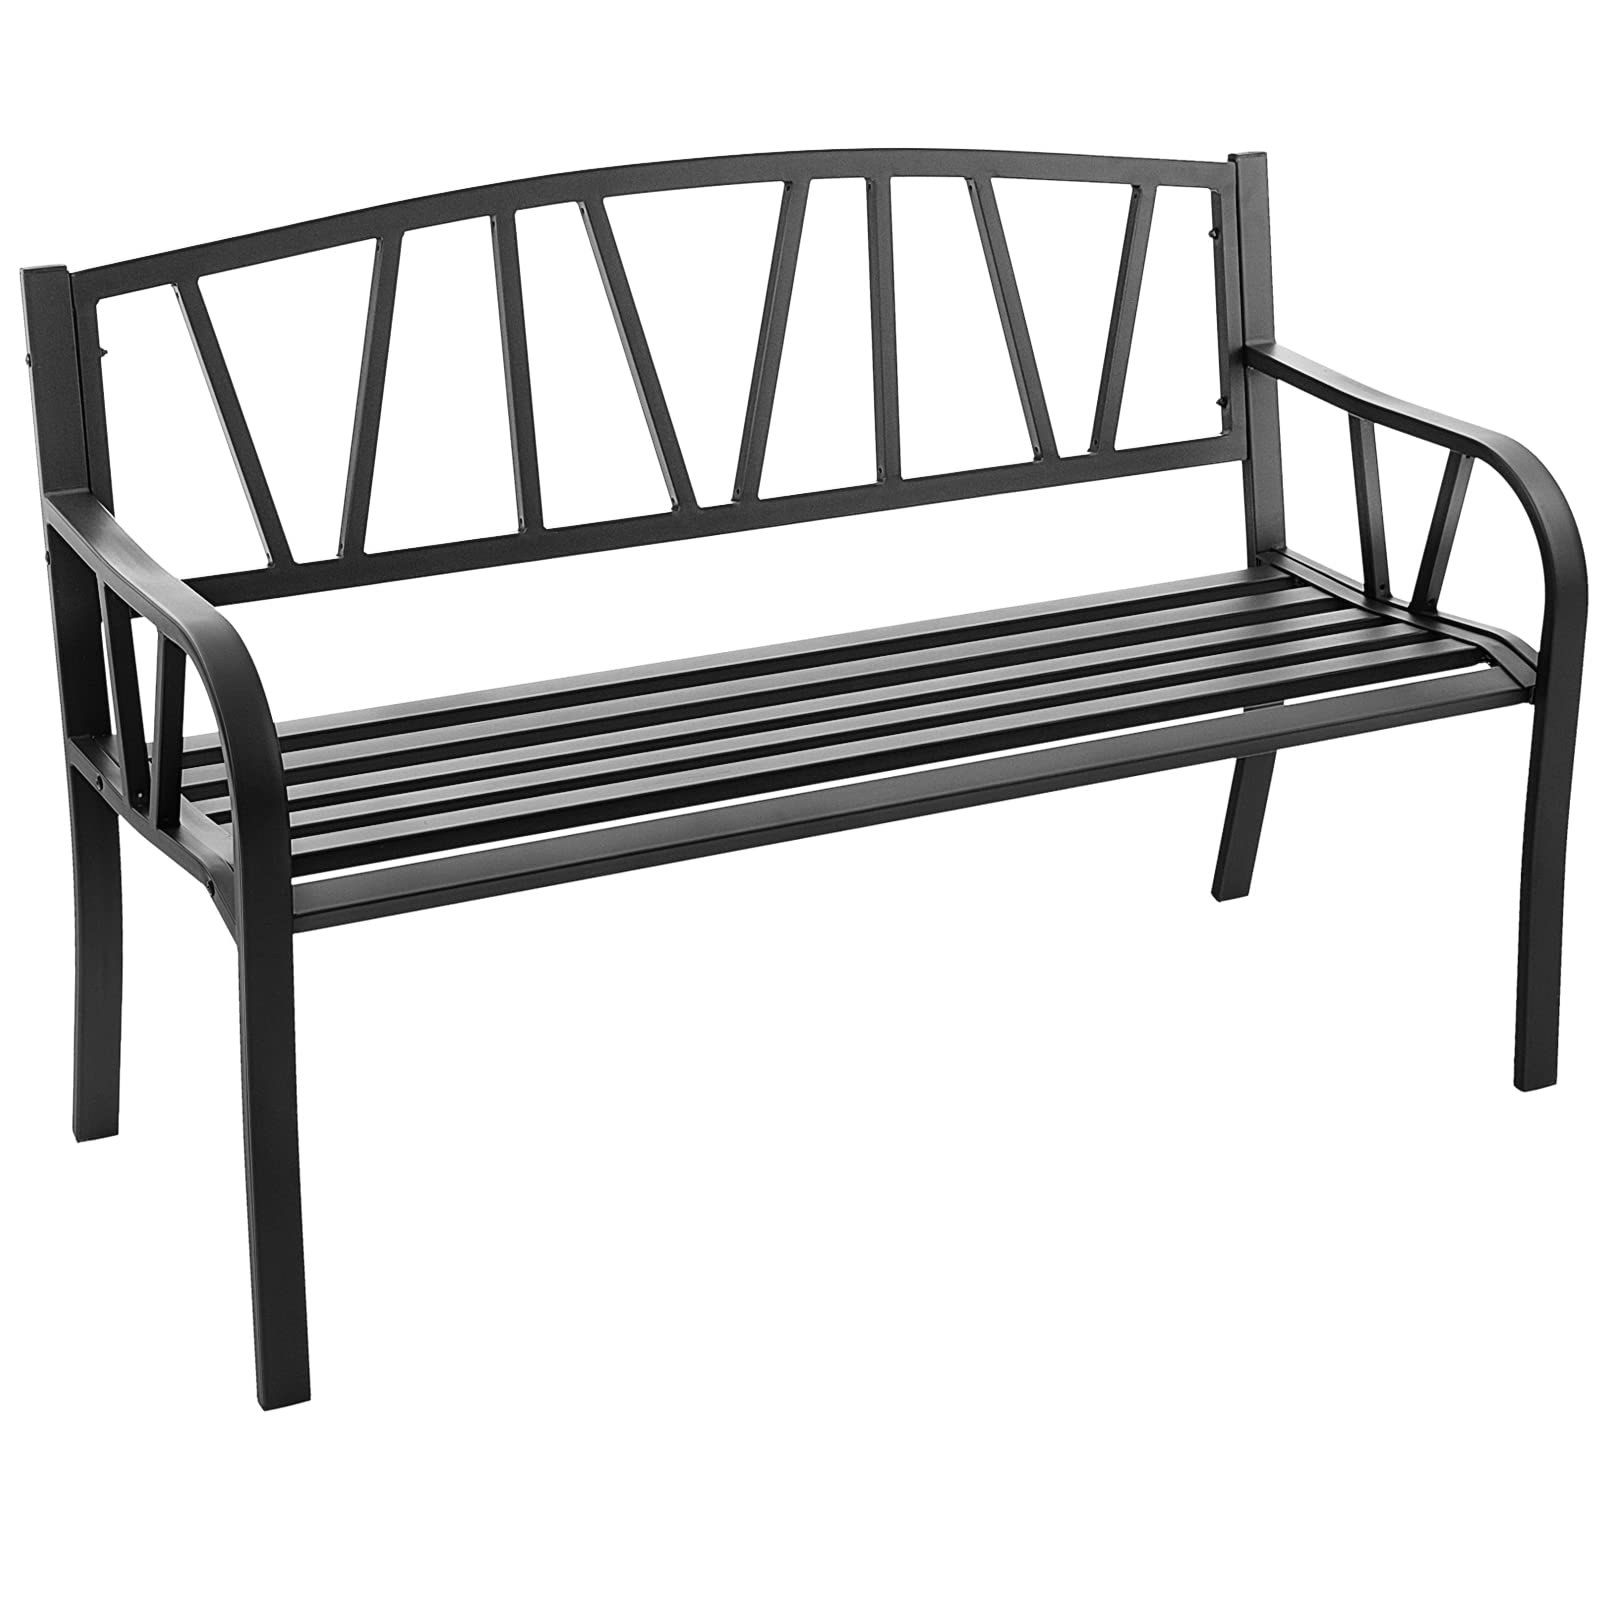 Giantex Garden Bench for Outside 50 Inch - Outdoor Bench with Rustproof Metal Frame, Black